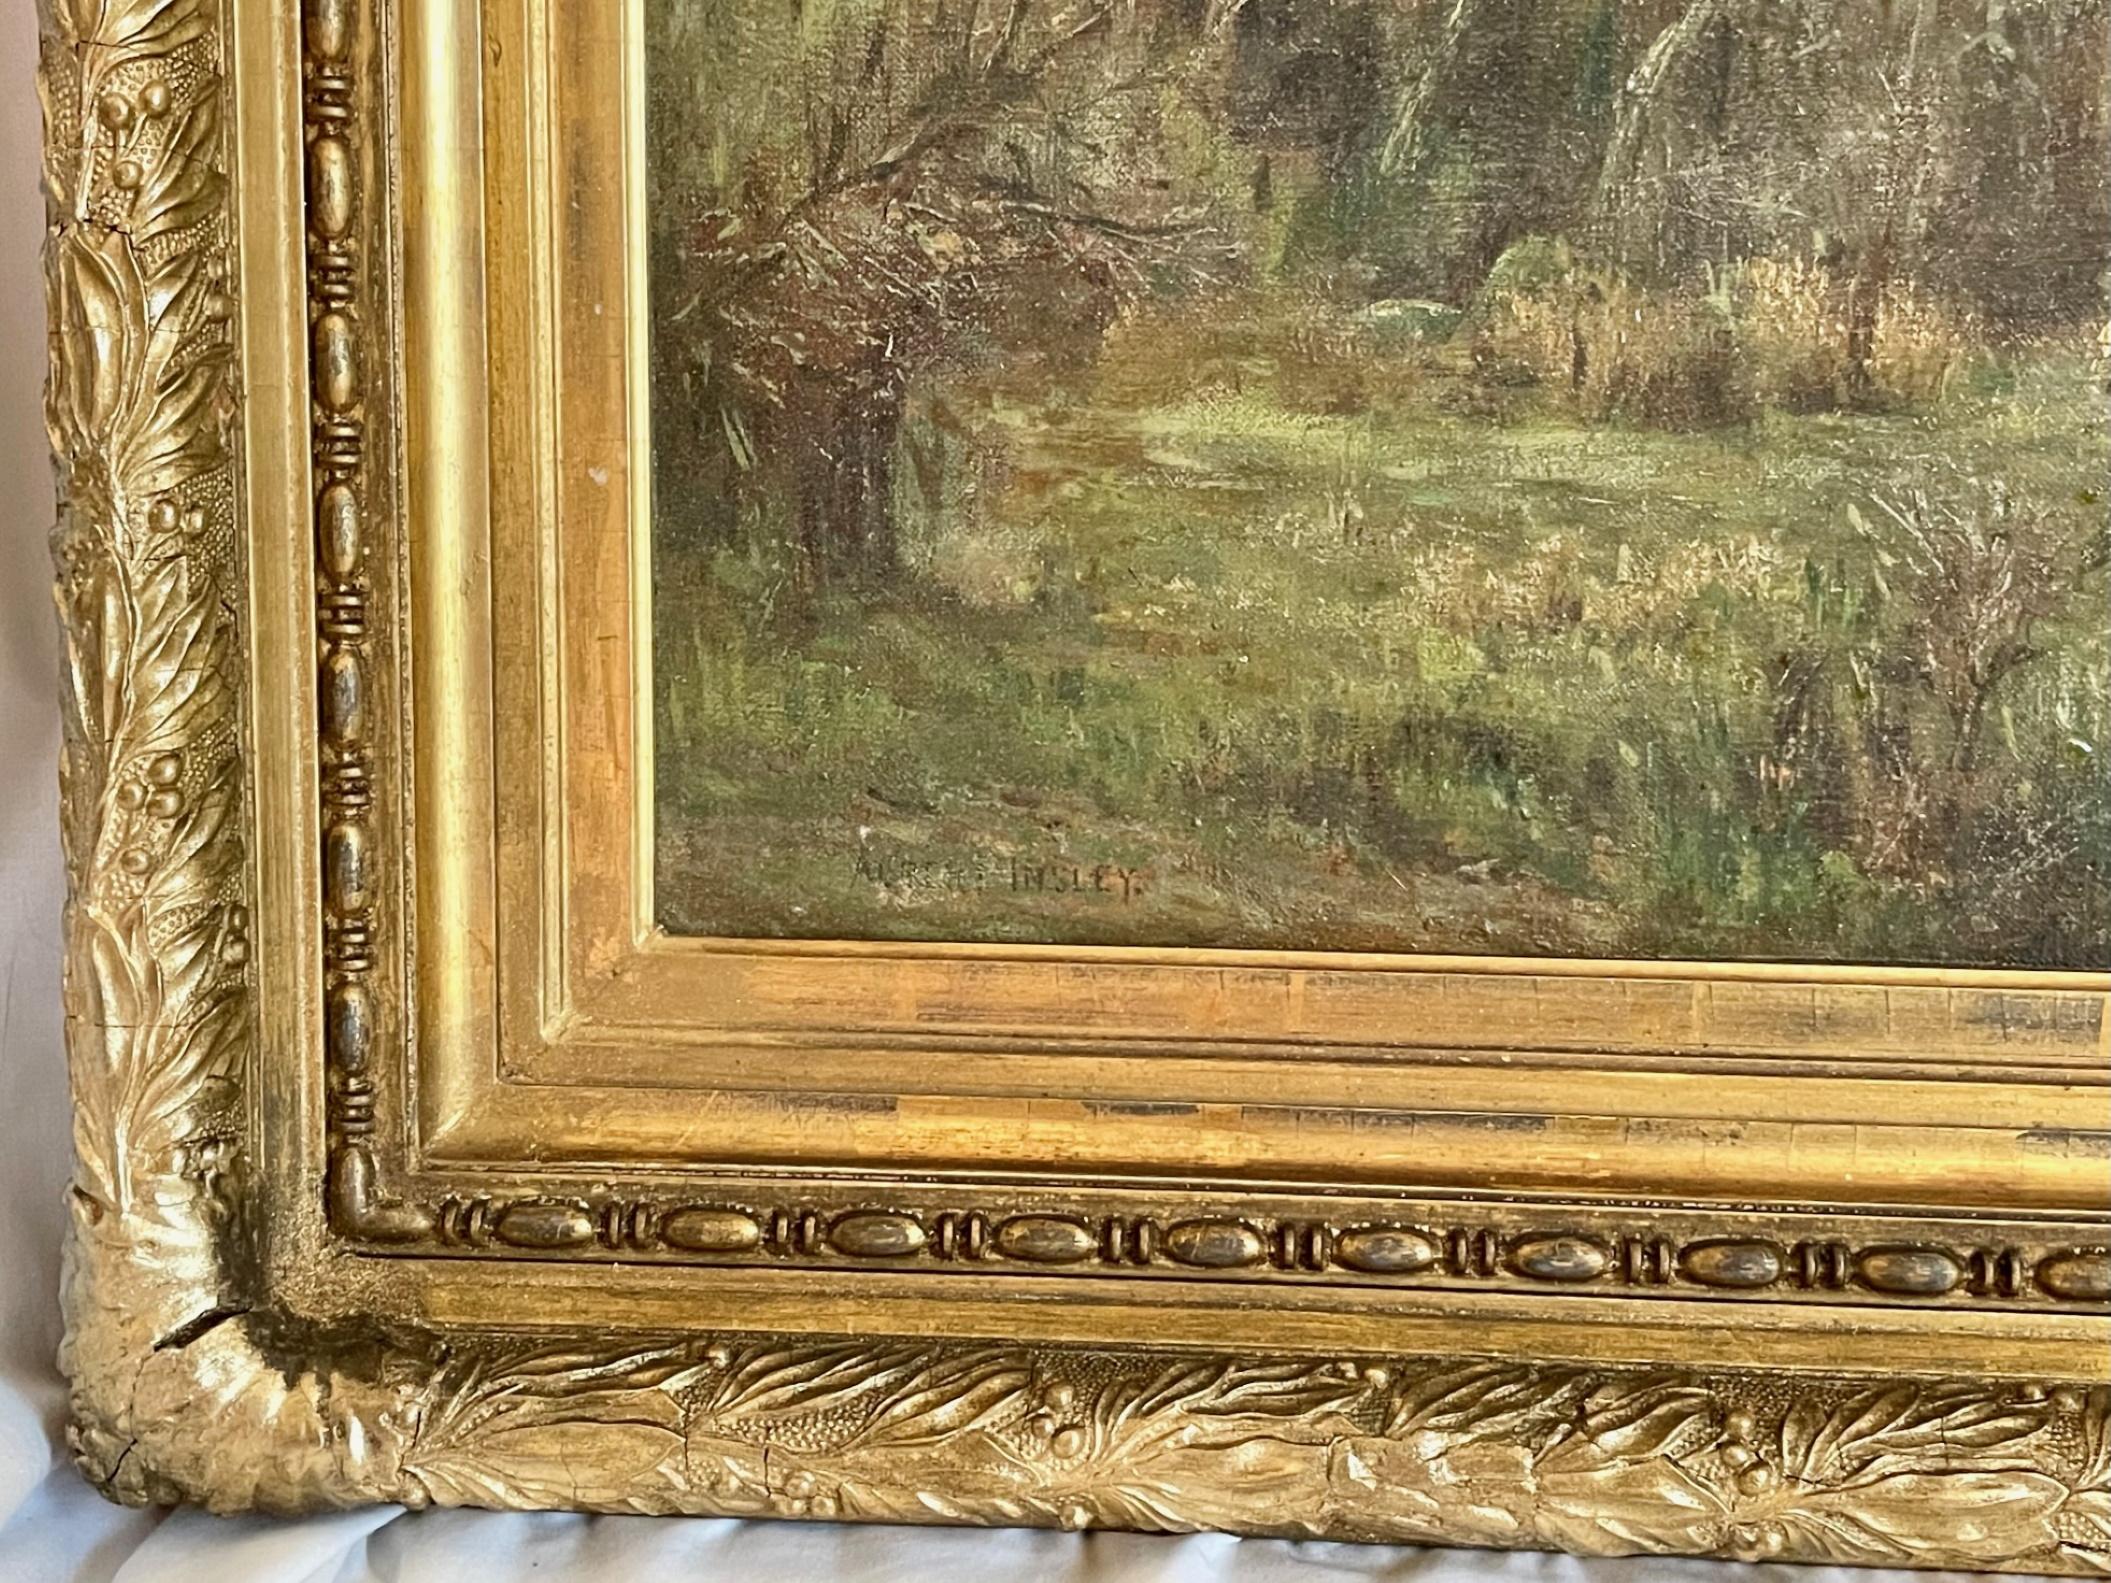 Canvas Large 19th Century Signed American Landscape Painting, Original Period Frame